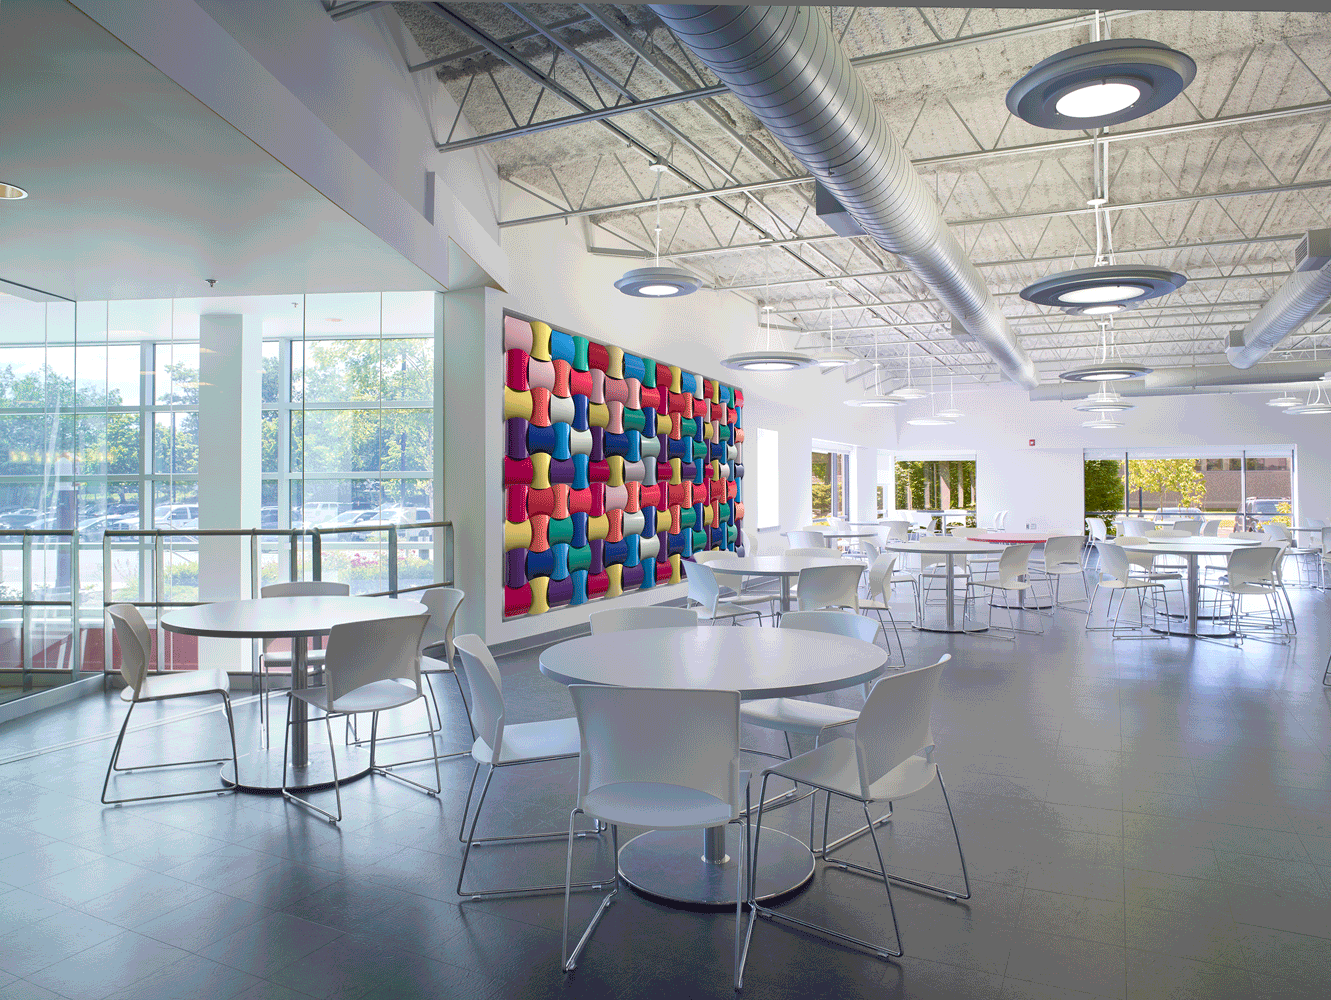 An example of the E-Ink Prism technology and how the color changing wall looks in an open space